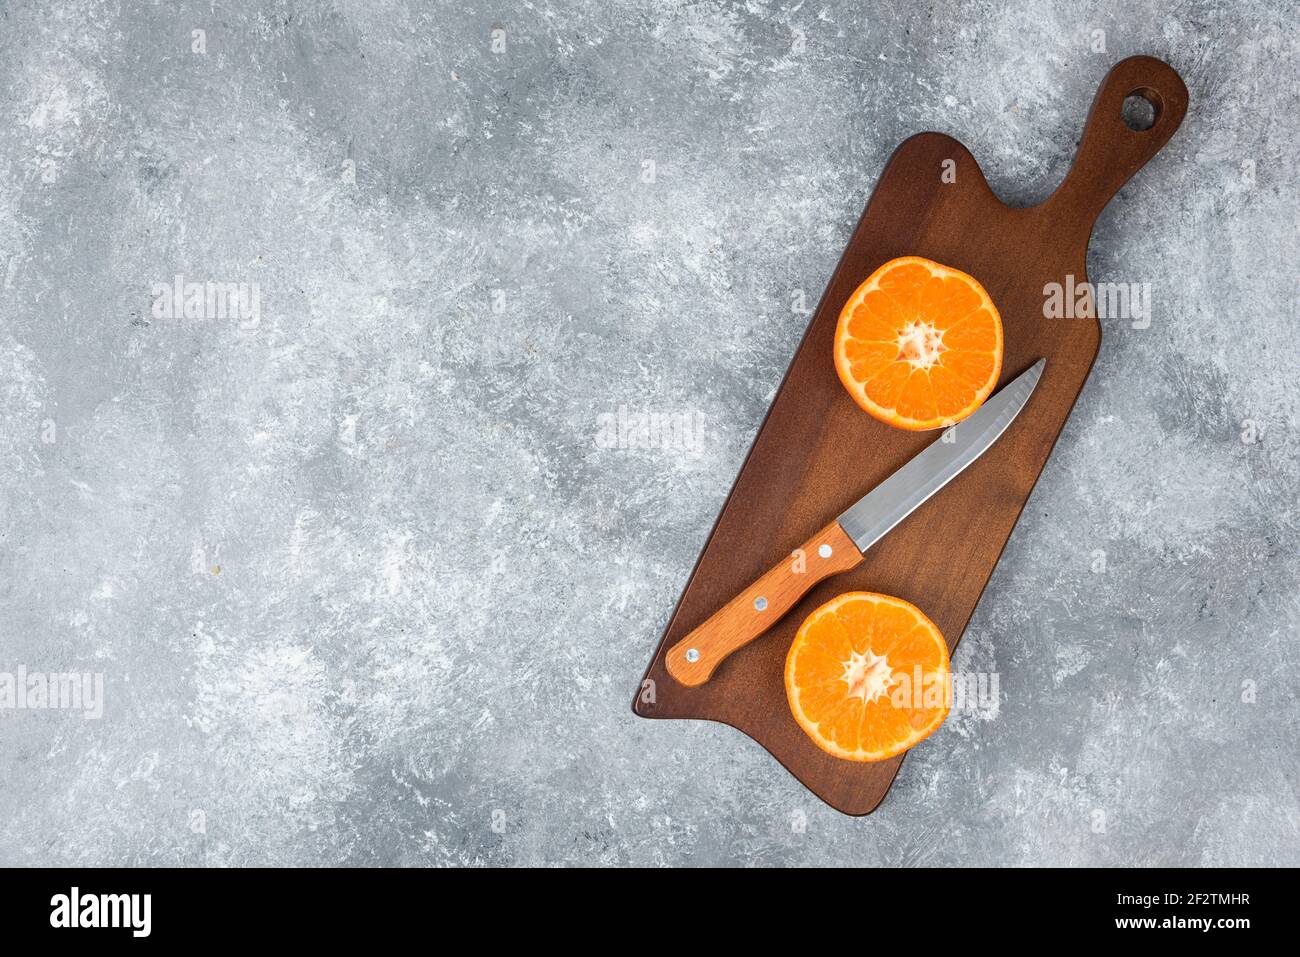 A wooden board of juicy slices of orange fruit with a knife on stone background Stock Photo